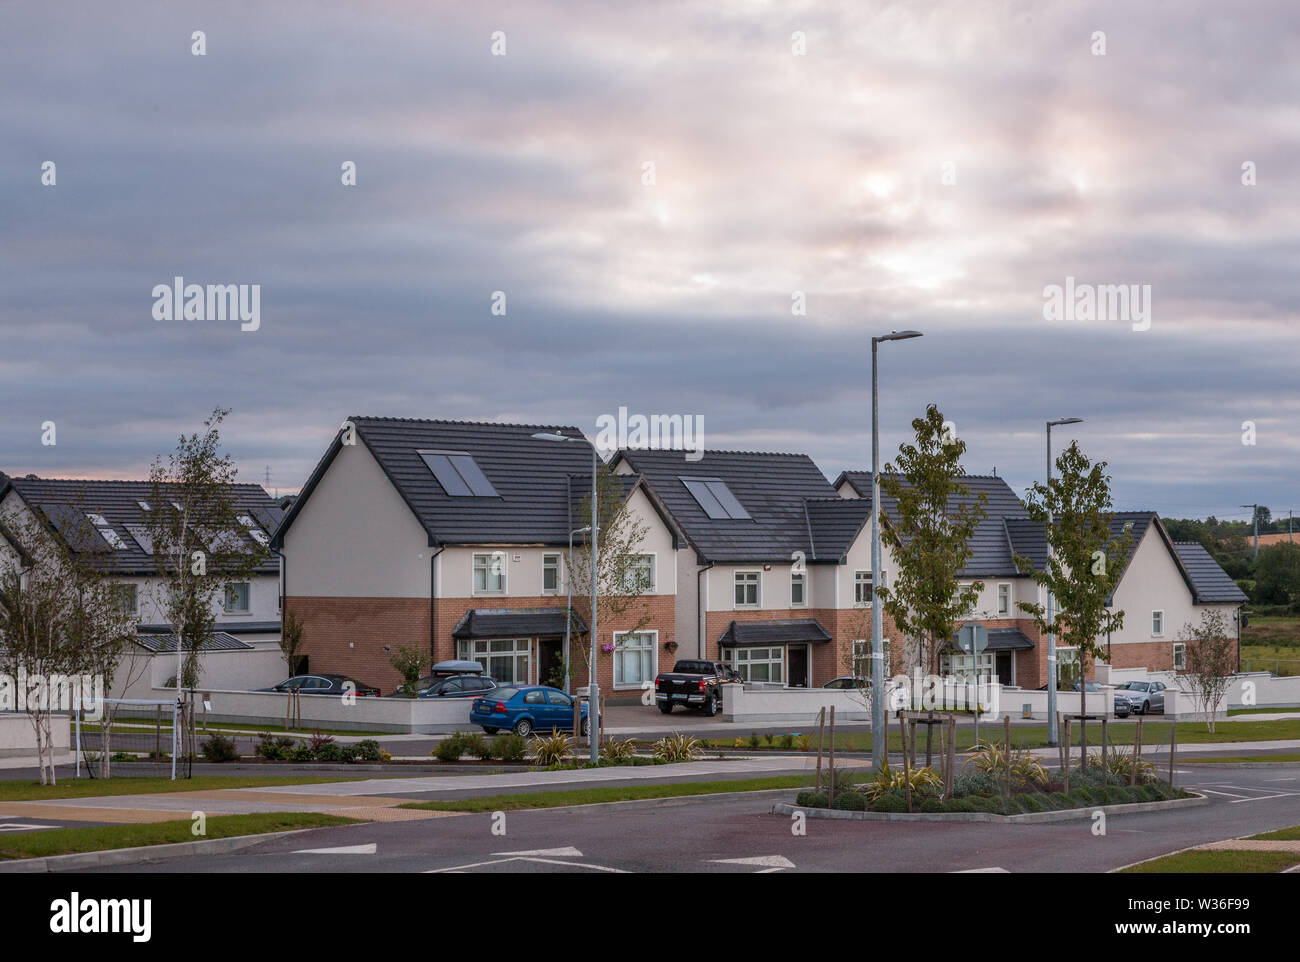 Carrigaline, Cork, Ireland. 13th July, 2019. A section of the first phase development of new homes  that is now completed and occuped by new owners at Janeville, Carrigaline, Co. Cork, Ireland. Located on the Cork side of Carrigaline, these are part of 800 housing units presently being built. Credit: David Creedon/Alamy Live News Stock Photo